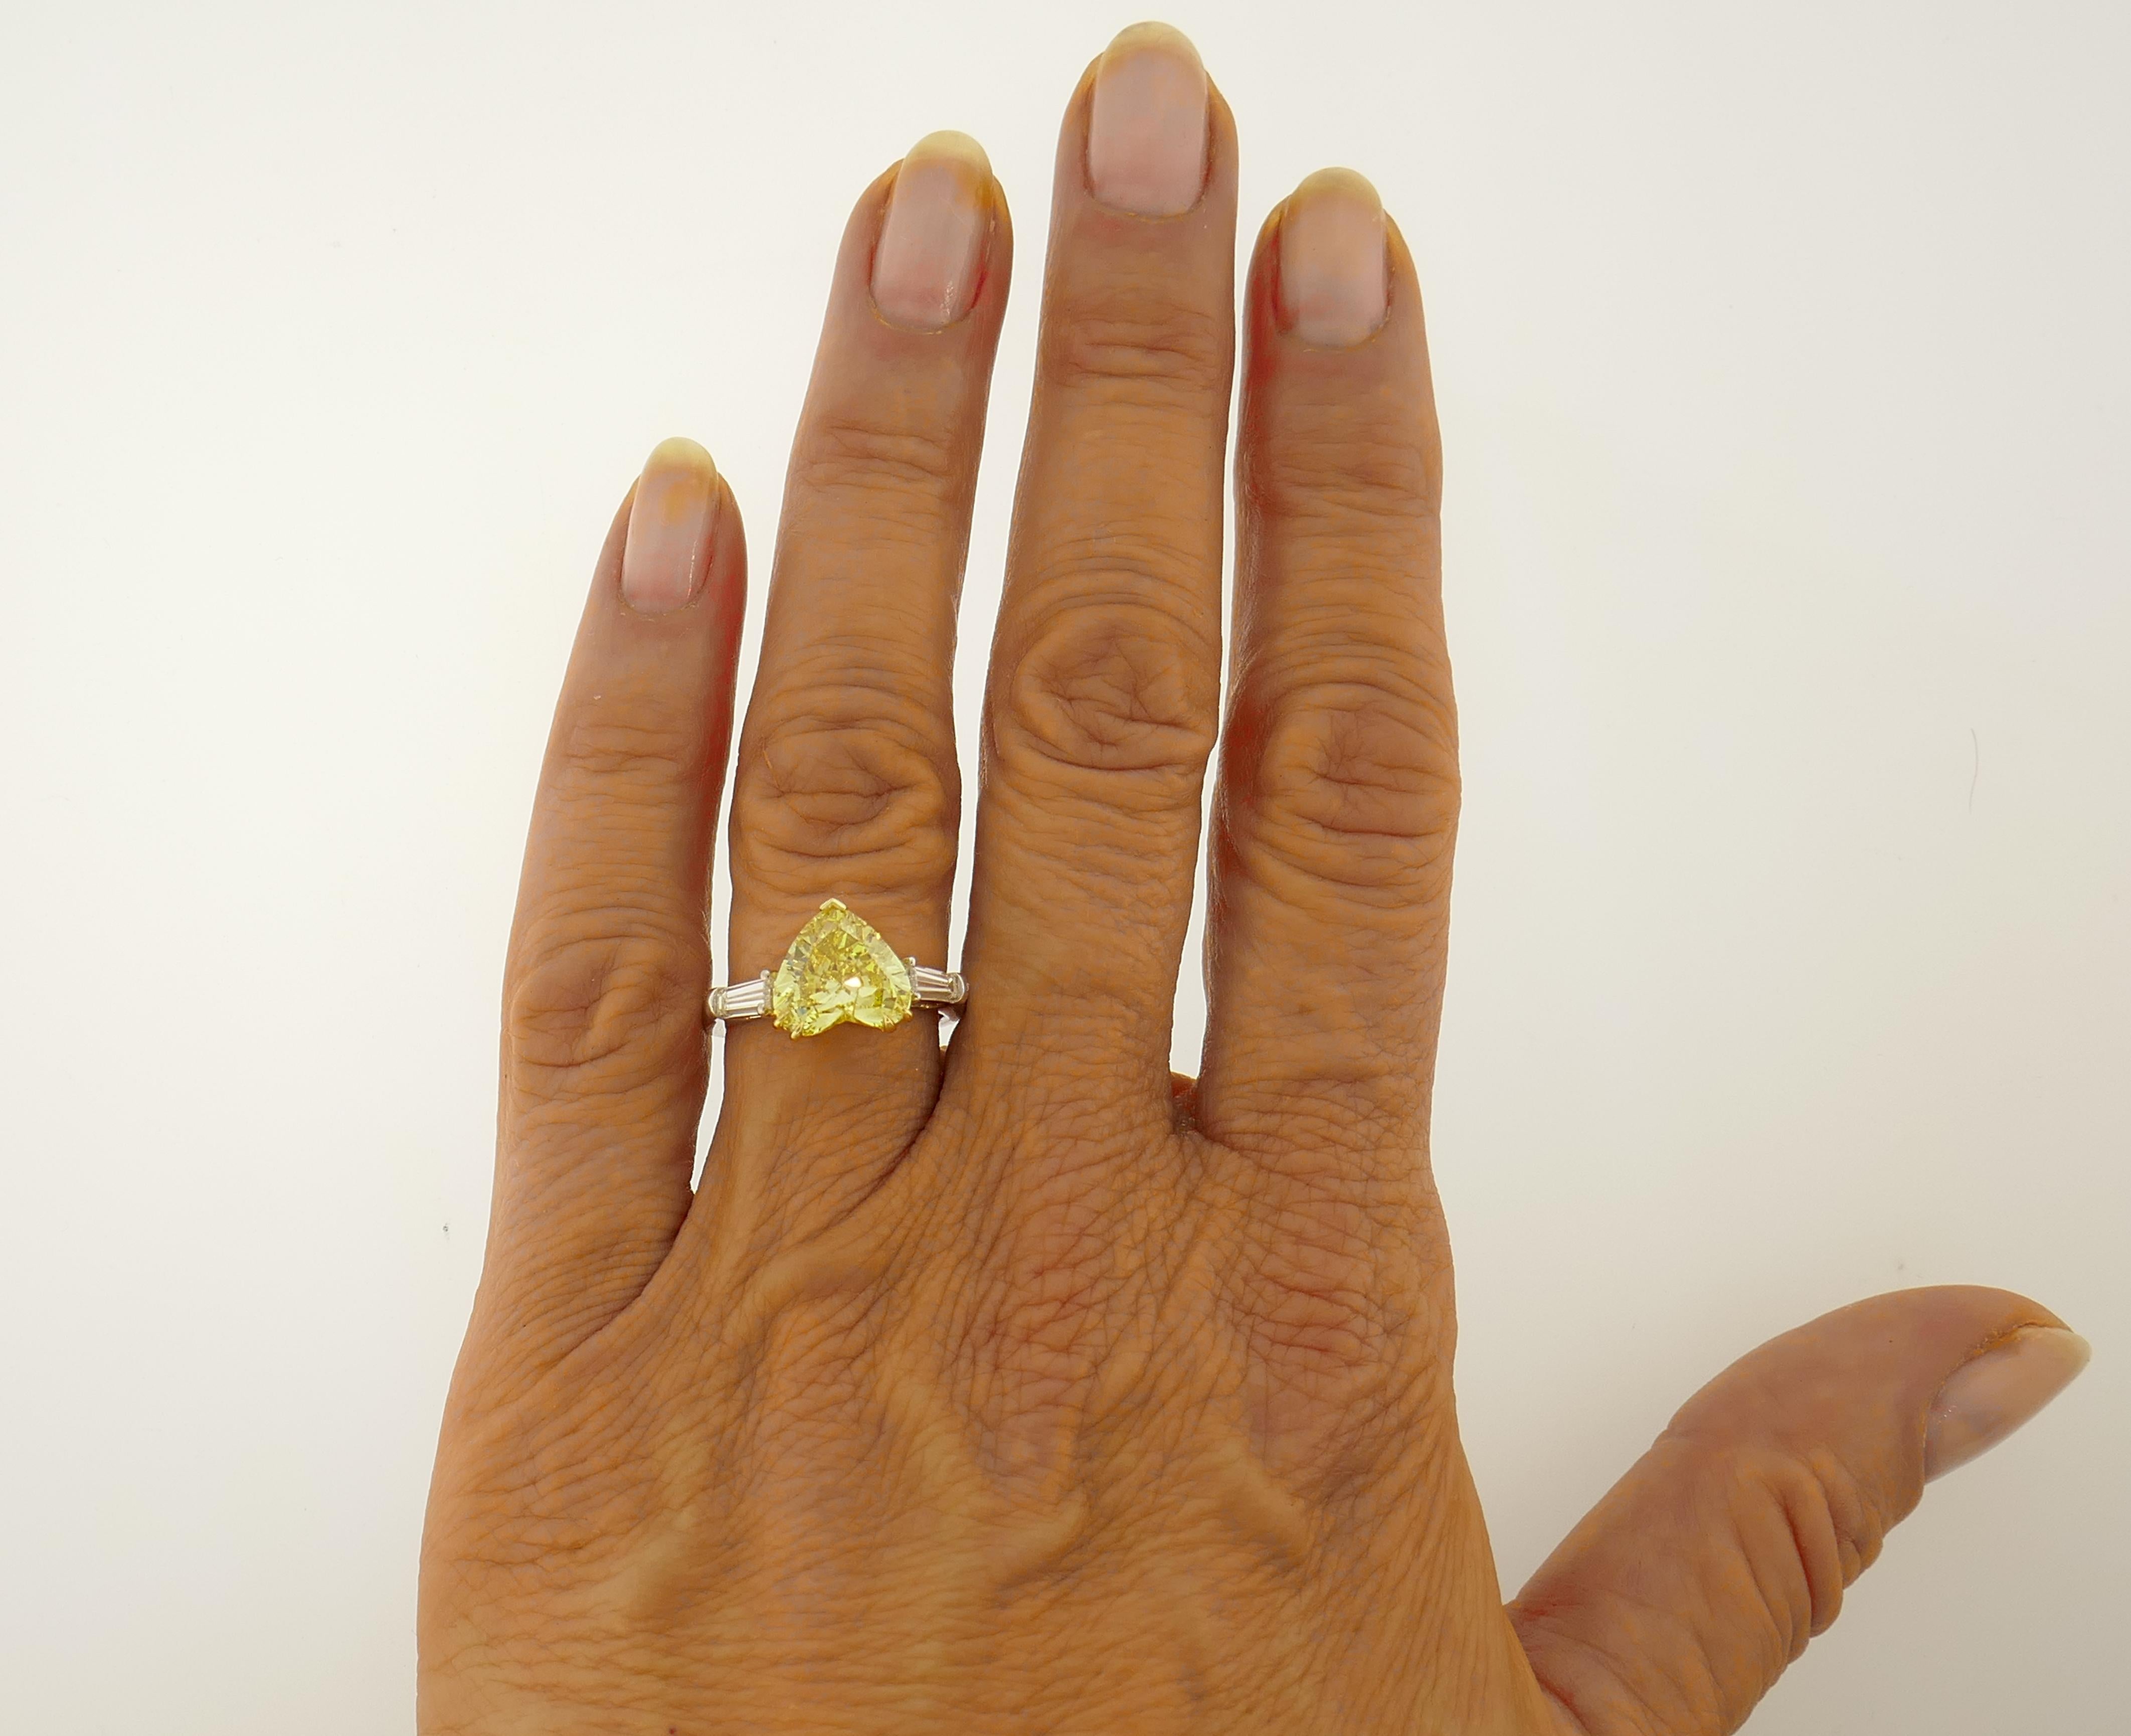 Magnificent heart-shape yellow diamond solitaire ring! Features a 2.64-carat natural fancy vivid yellow heart brilliant cut diamond flanked by two tapered baguette cut white diamonds. The fancy yellow diamond comes with a GIA Colored Diamond Grading